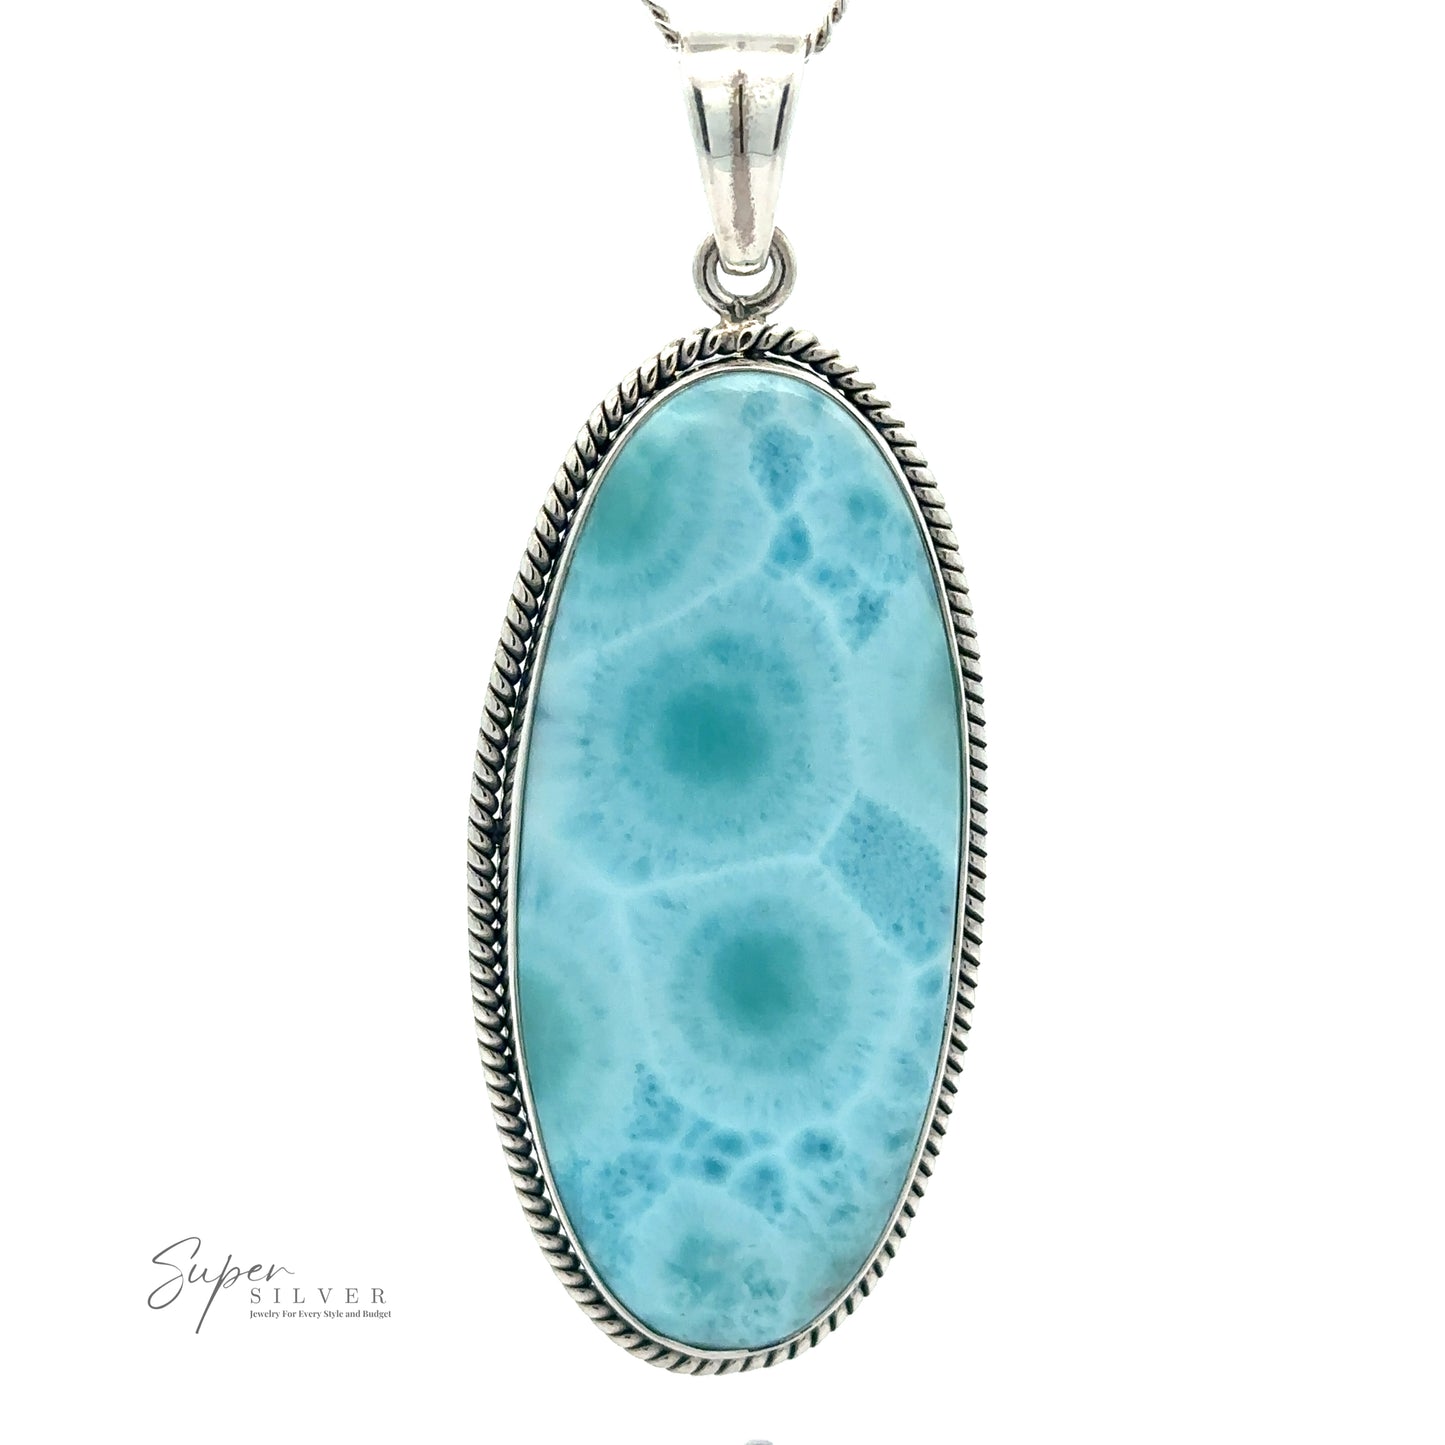 An Oblong Larimar Pendant with Rope Border featuring an oval larimar stone with intricate blue and white patterns, hanging from a chain. The statement jewelry piece has a detailed rope-like border and measures 27x71mm.